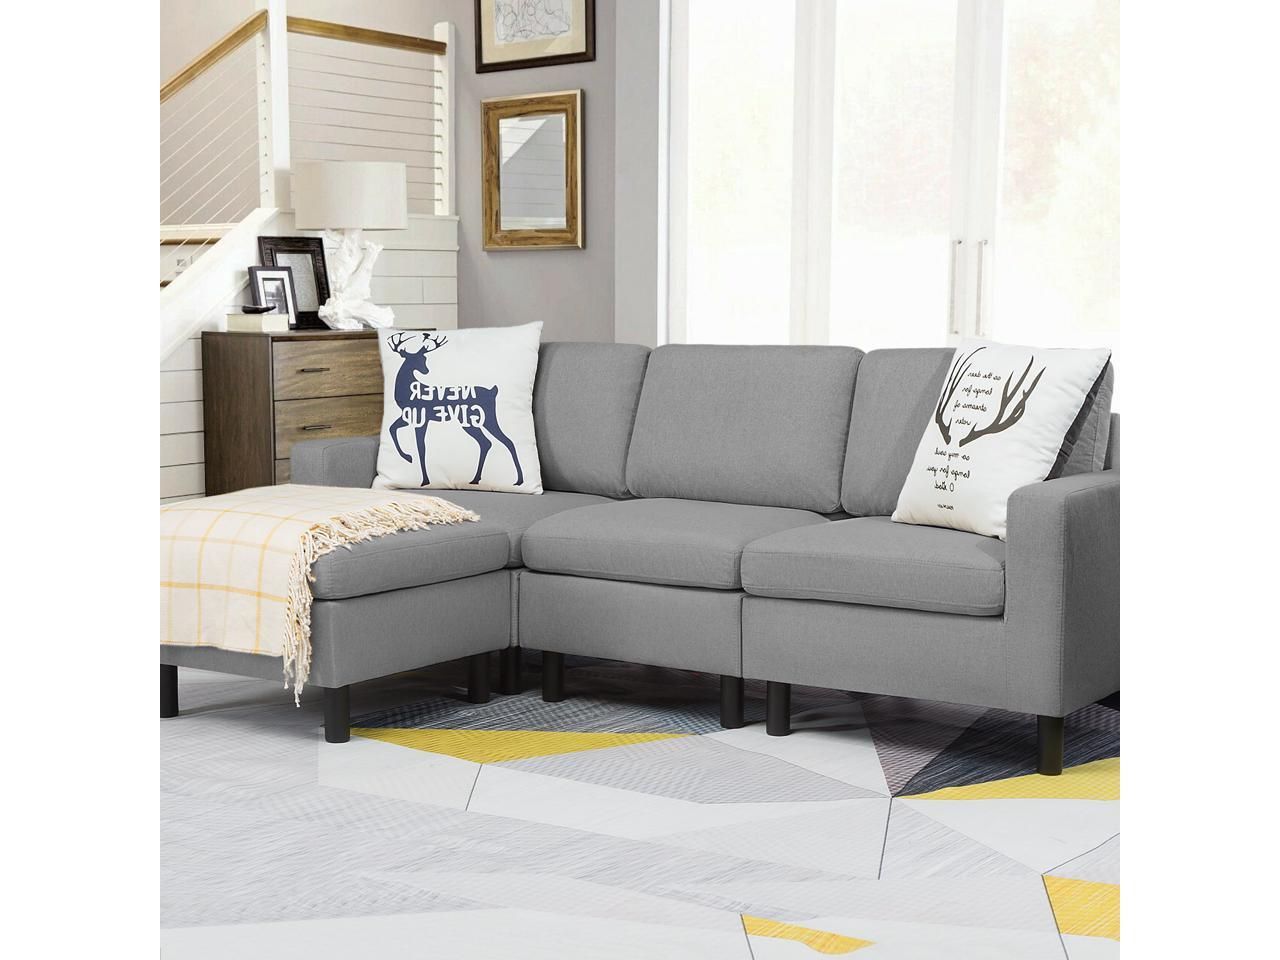 Waleaf Convertible Sectional Sofa With Reversible Chaise, L Shape 3 In 3 Seat Convertible Sectional Sofas (View 12 of 20)